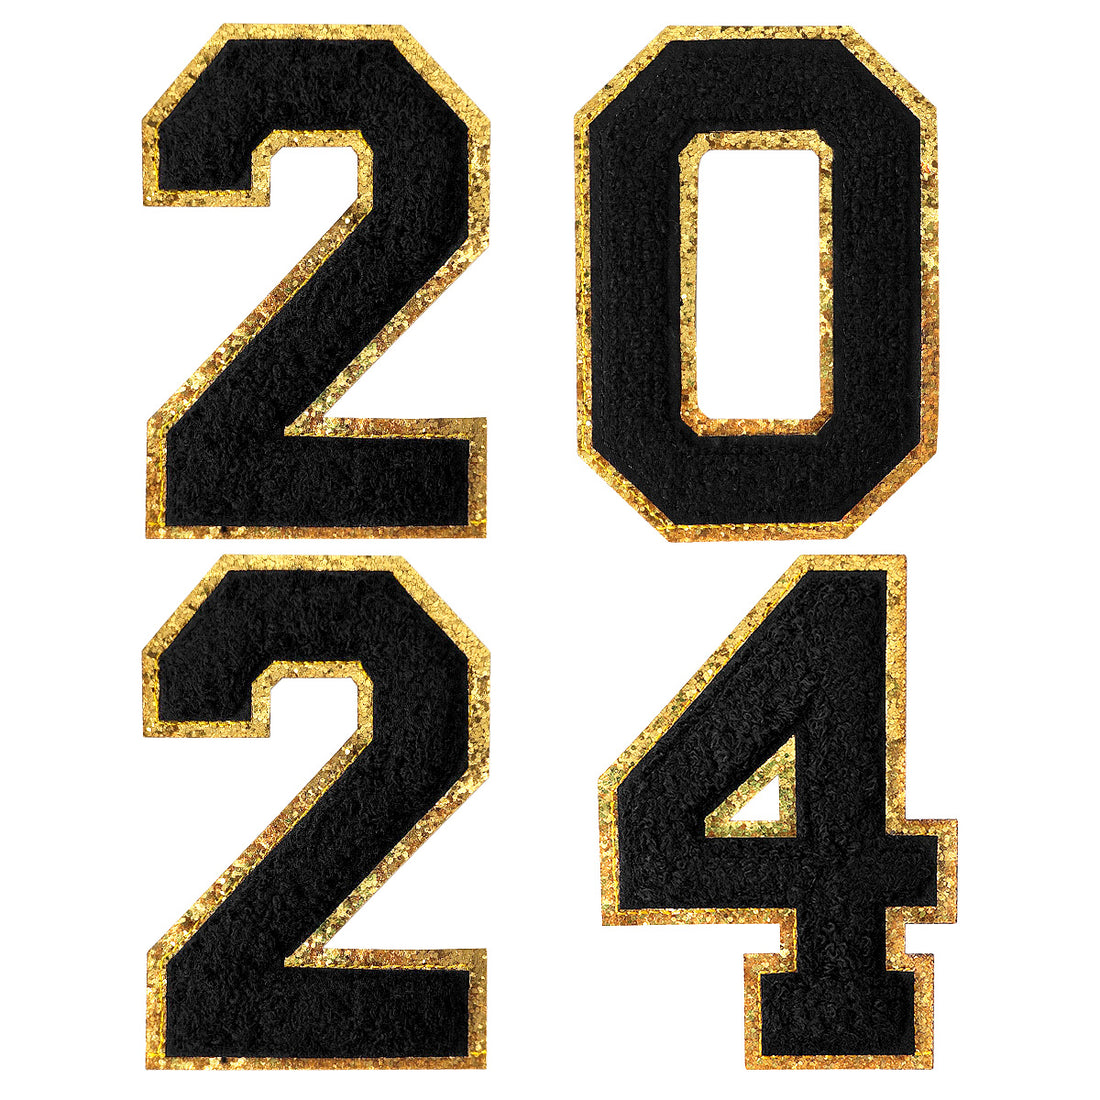 2024 Black Chenille Number, 4.5" Iron on Number Patches, Chenille Stitch Numbers 2024 Patches for Clothing